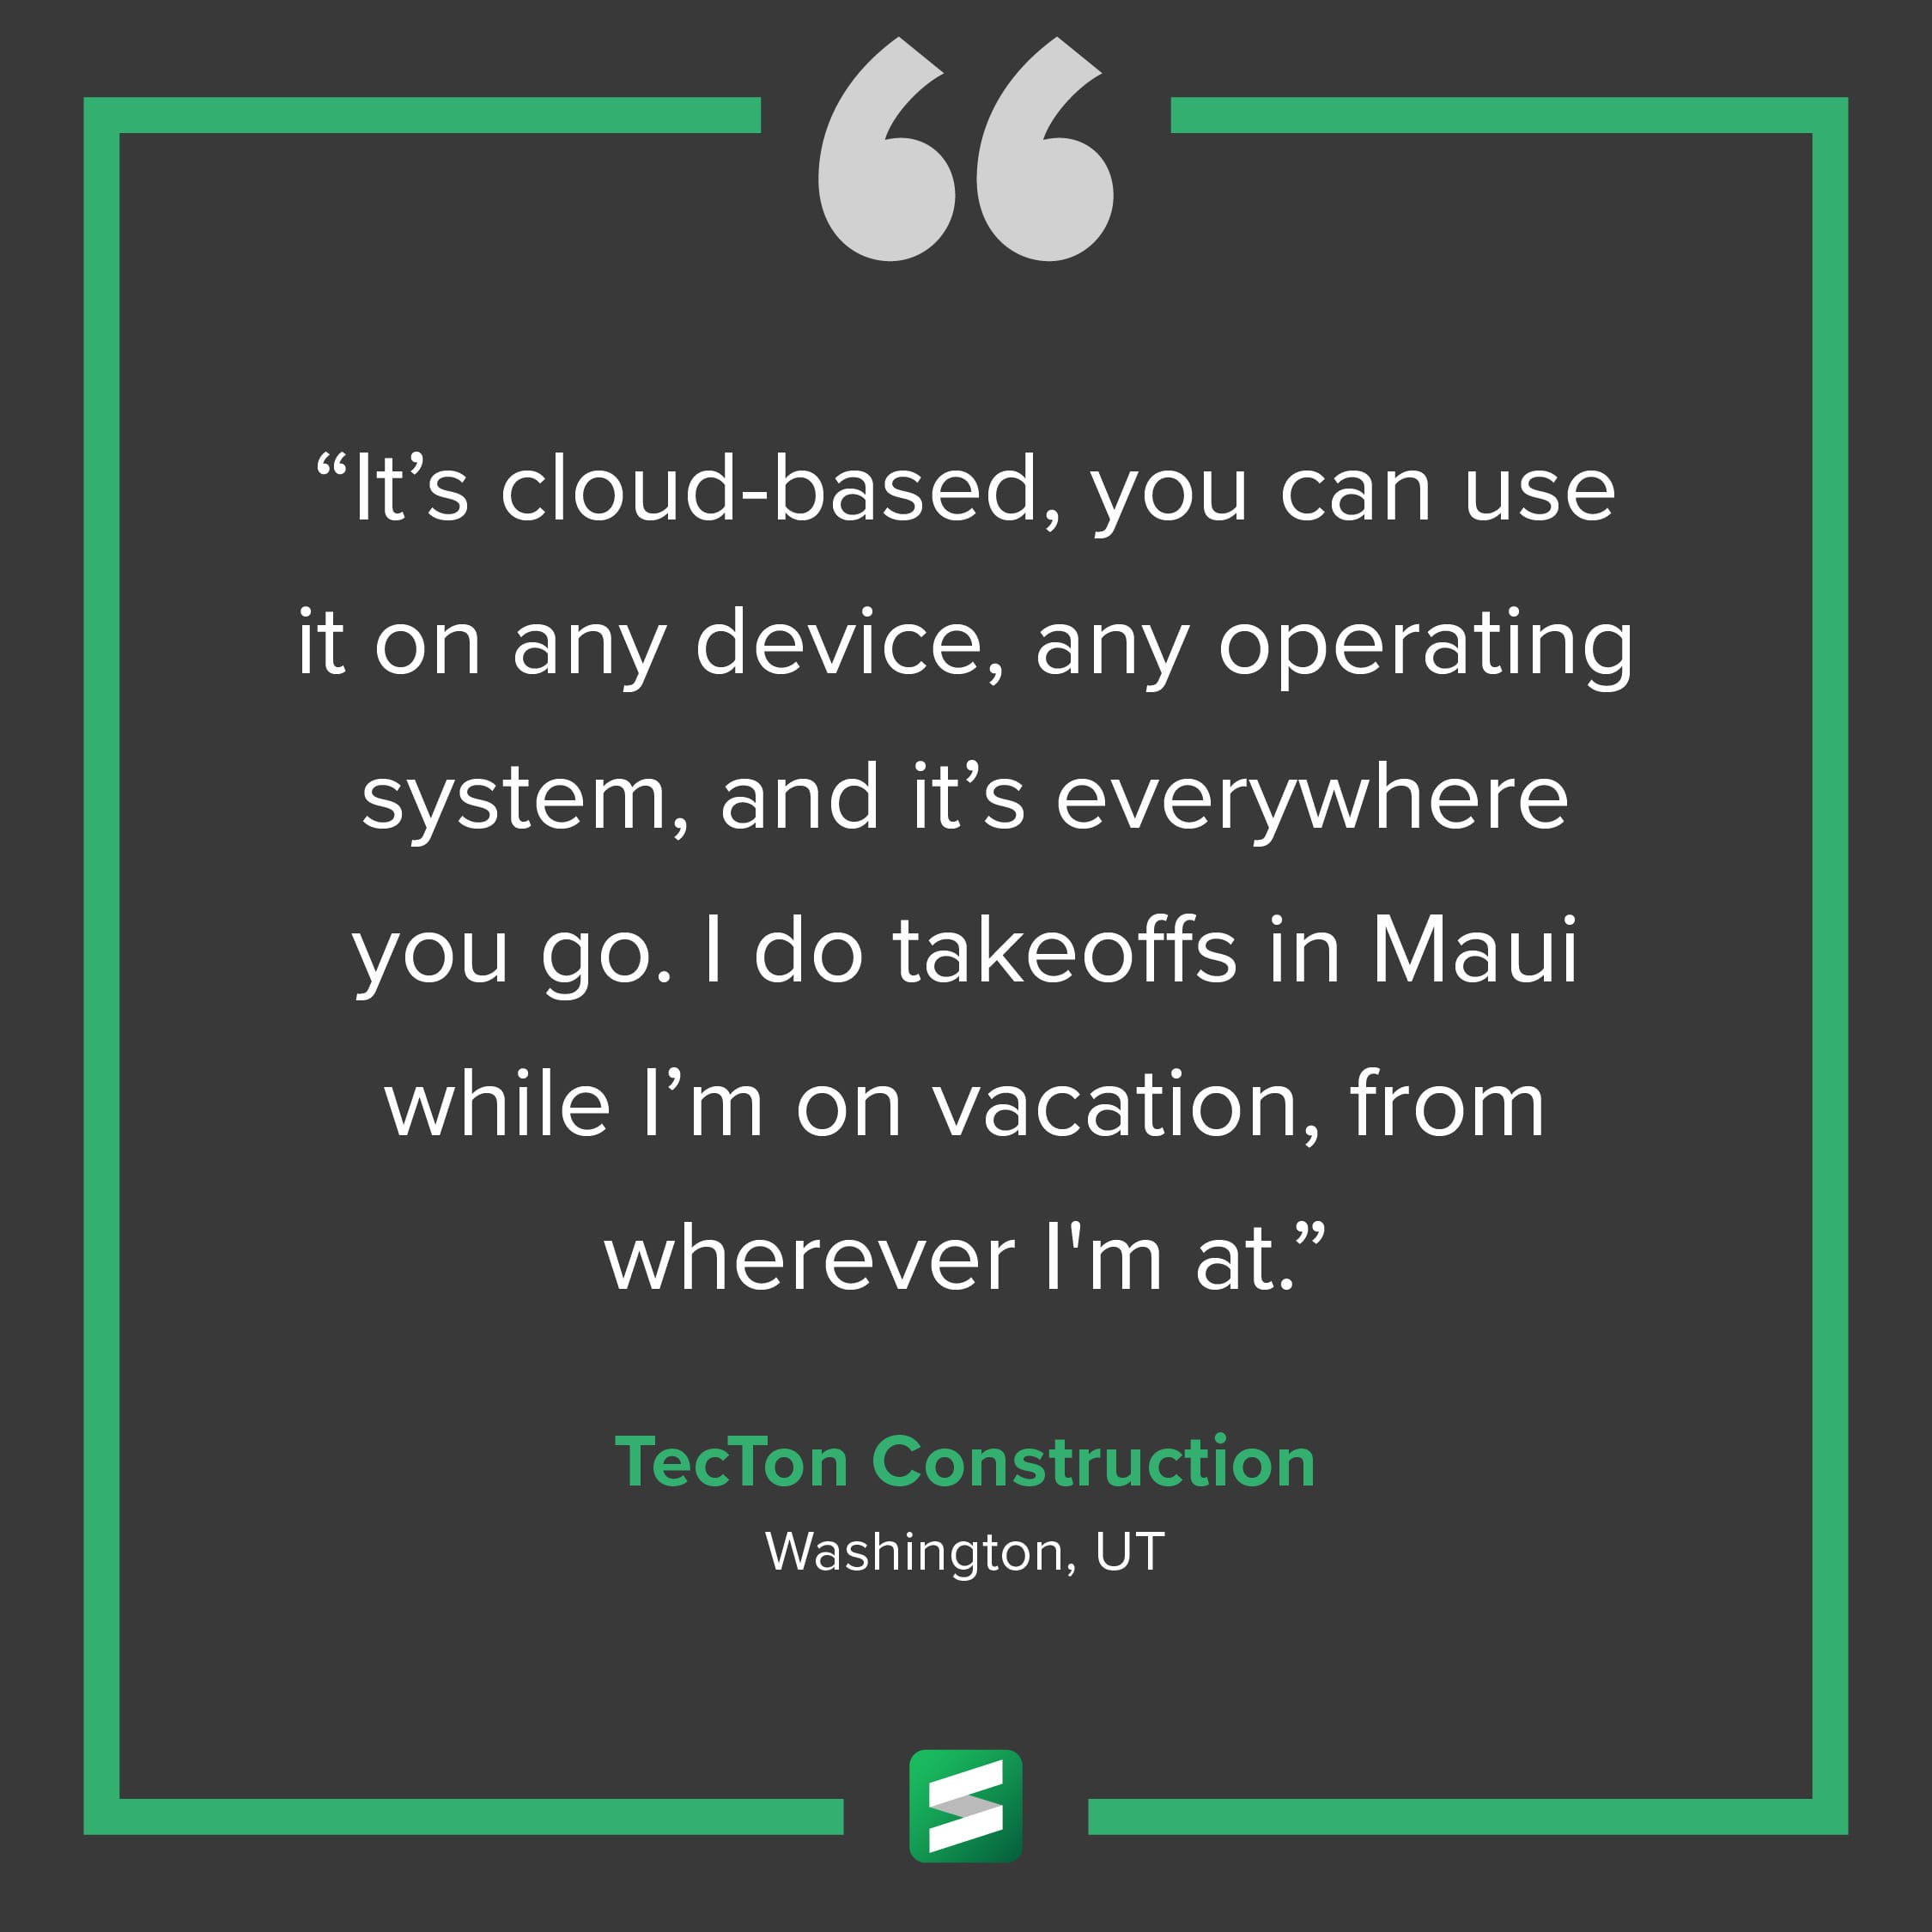 "It's cloud-based, you can use it on any device, any operating system, and it's everywhere you go. I do takeoffs in Maui while I'm on vacation, from wherever I'm at." – TecTon Construction, Washington, UT